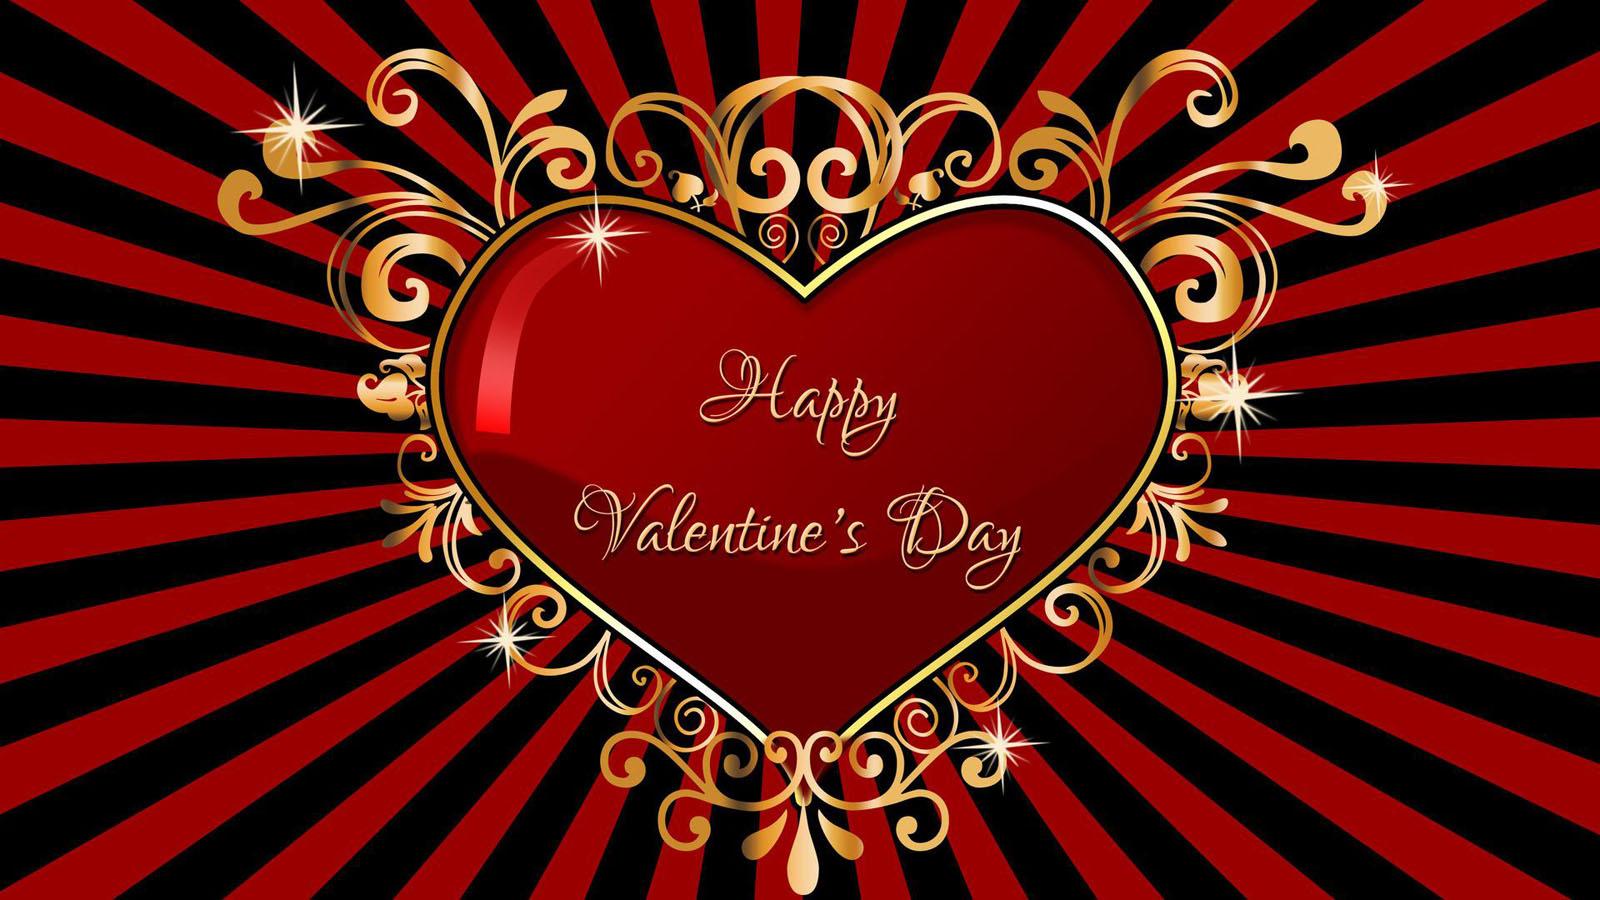 Happy Valentine's Day to All.